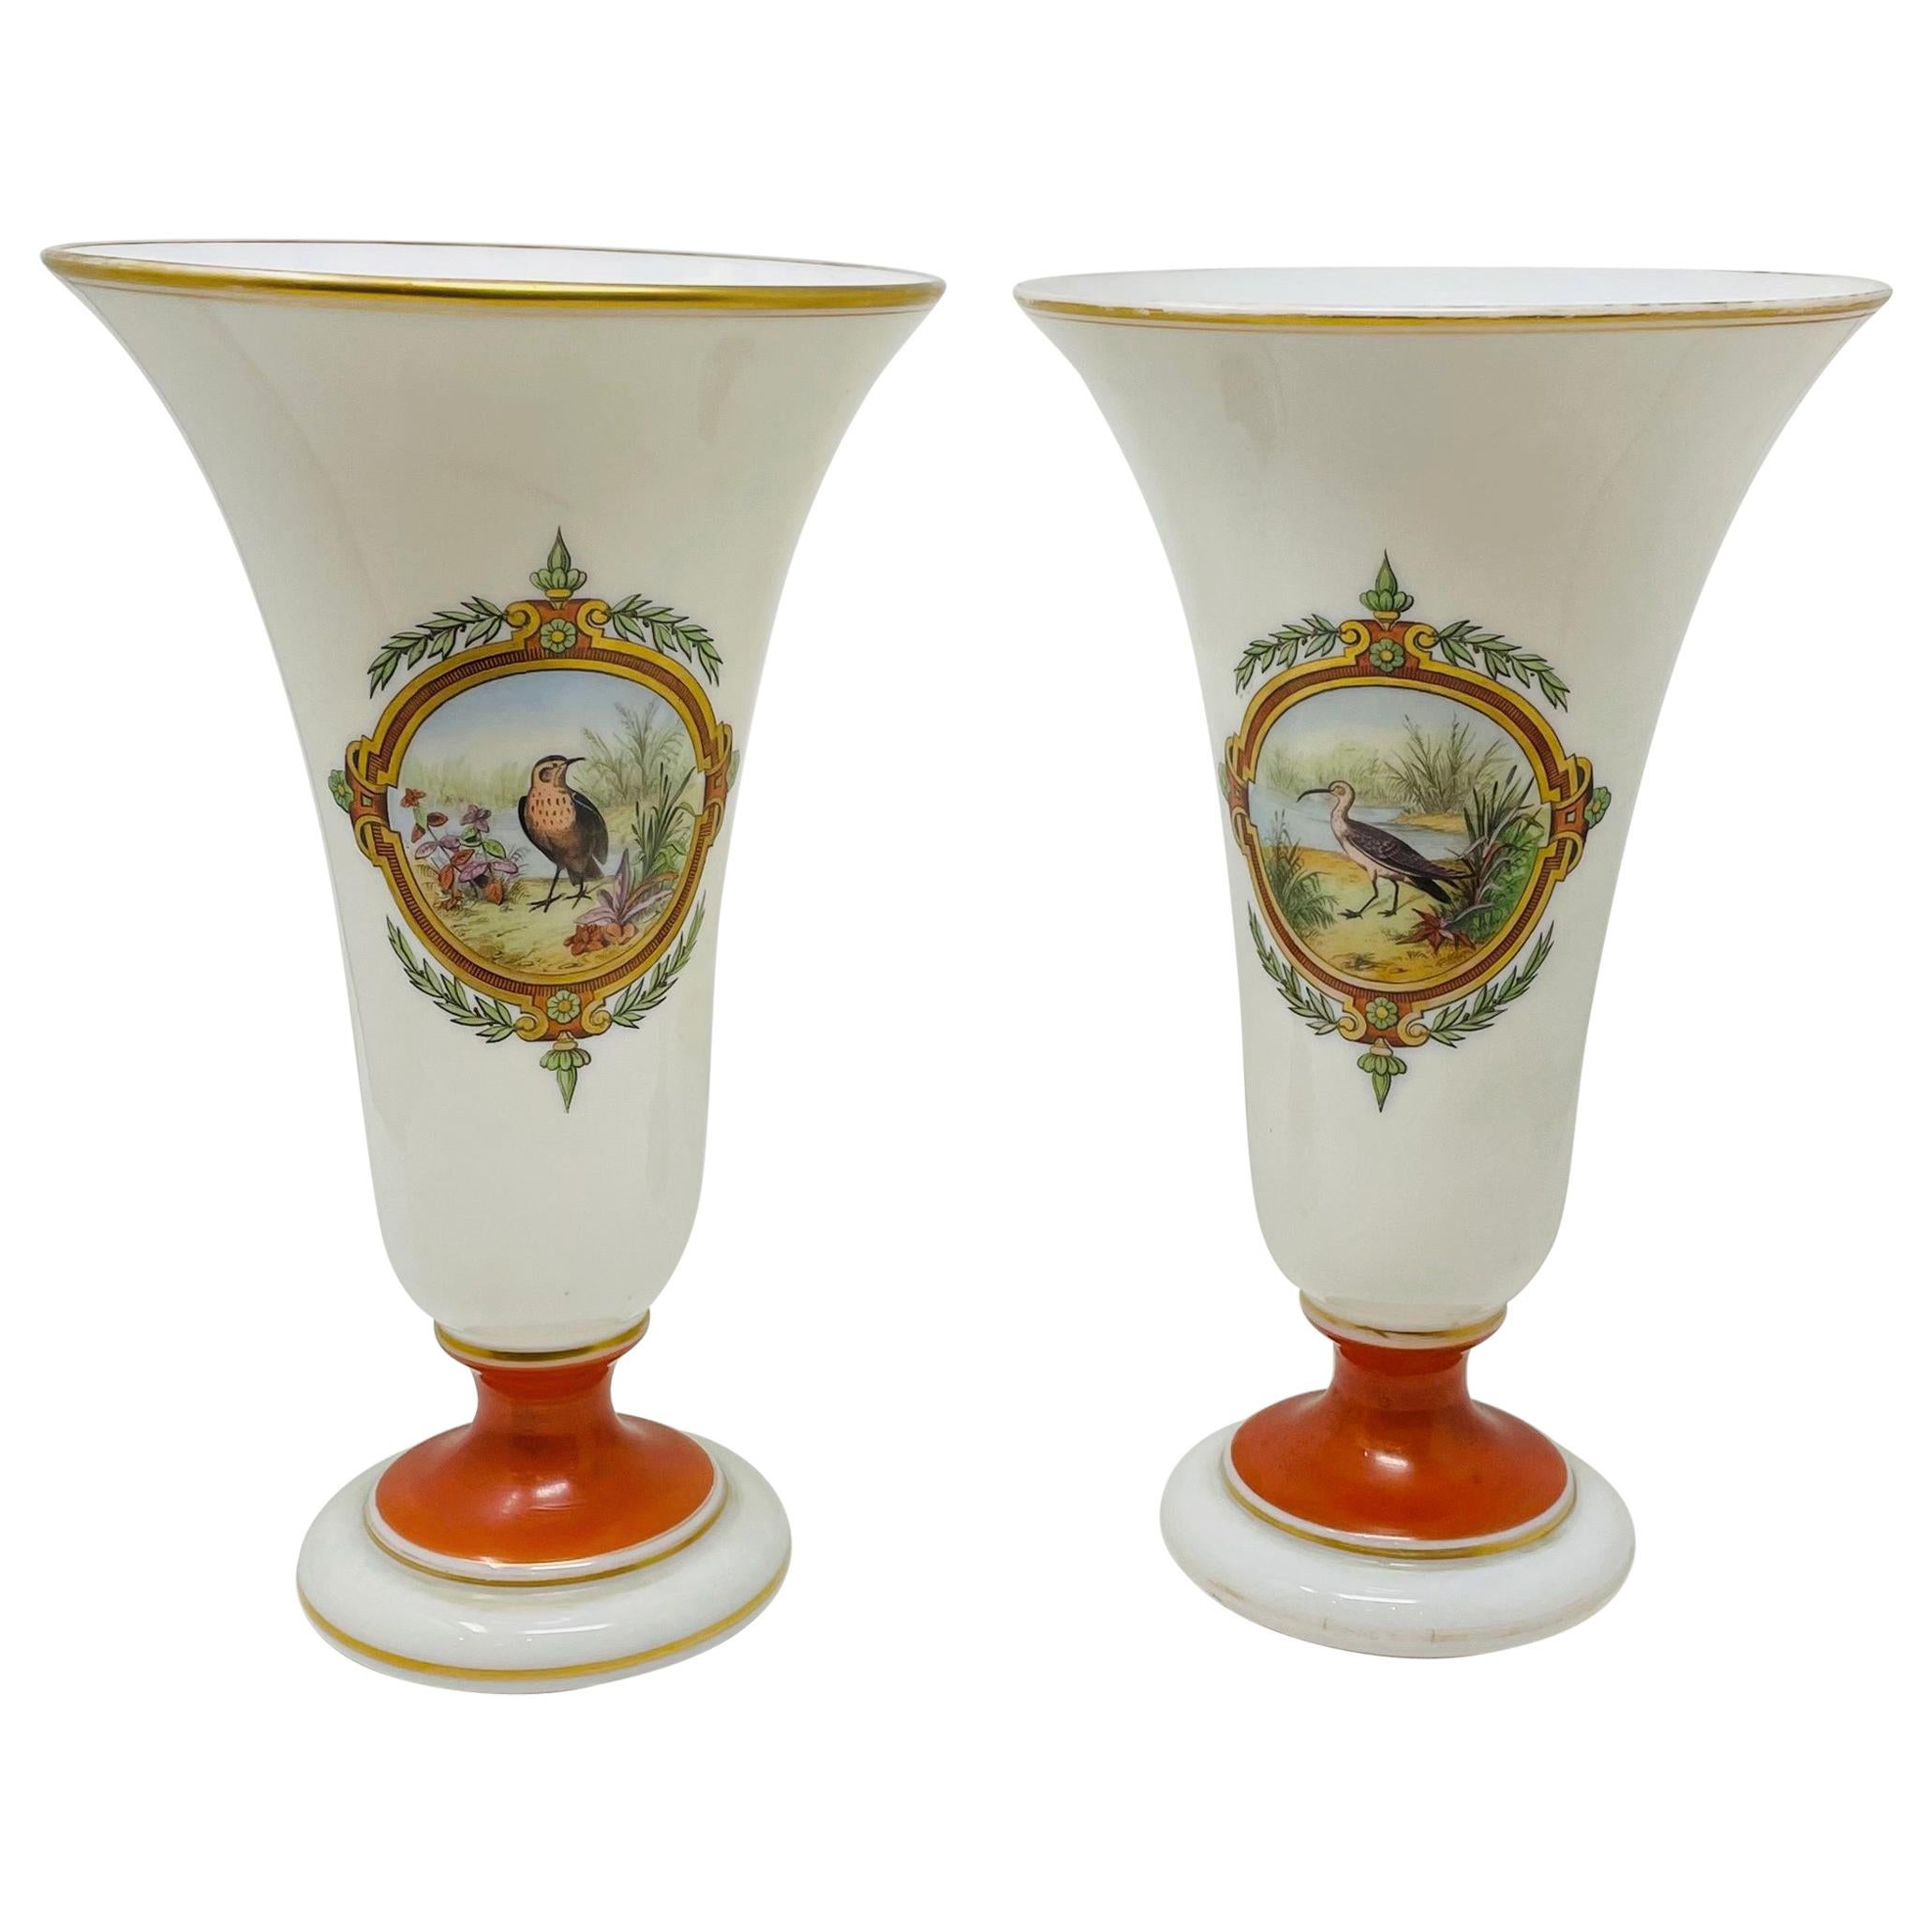 Pair of Opaline Vases, French, circa 1880